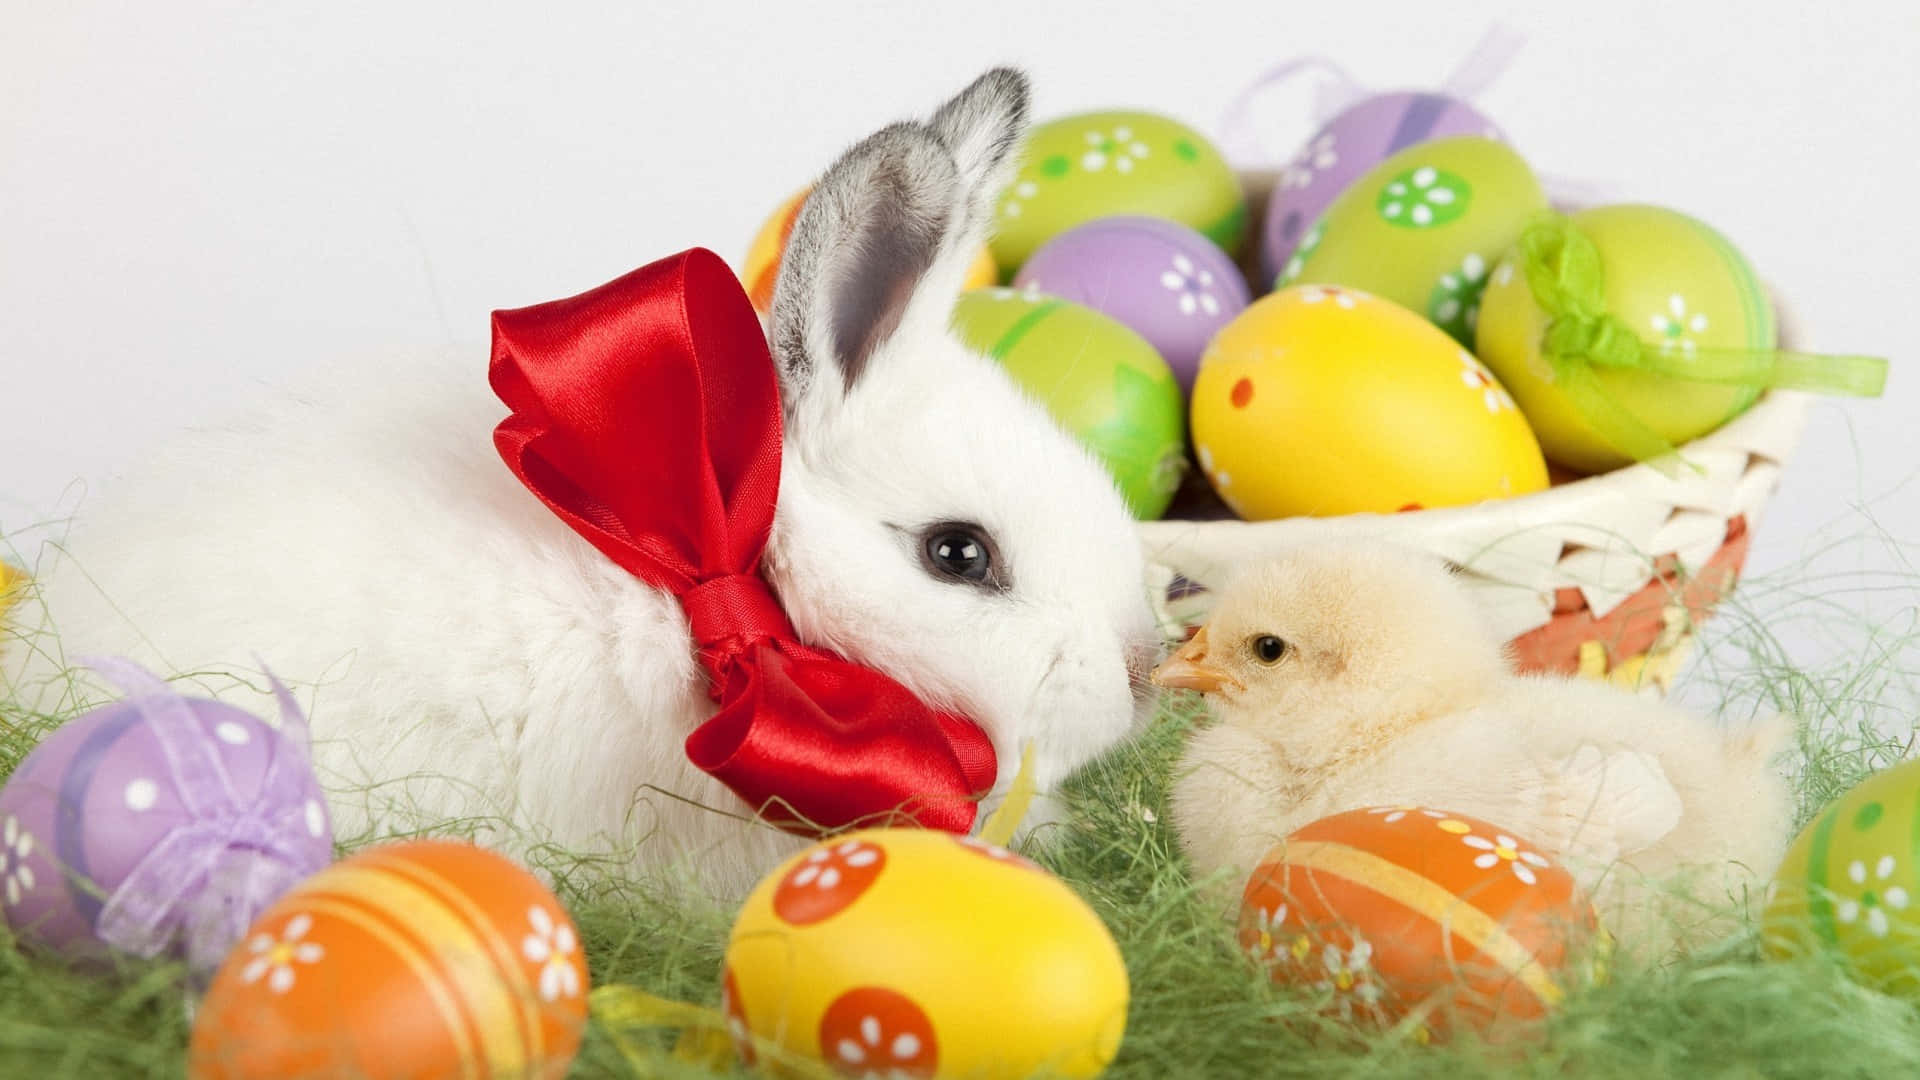 Adorable Easter Bunny with Colorful Eggs on a Lush Green Background